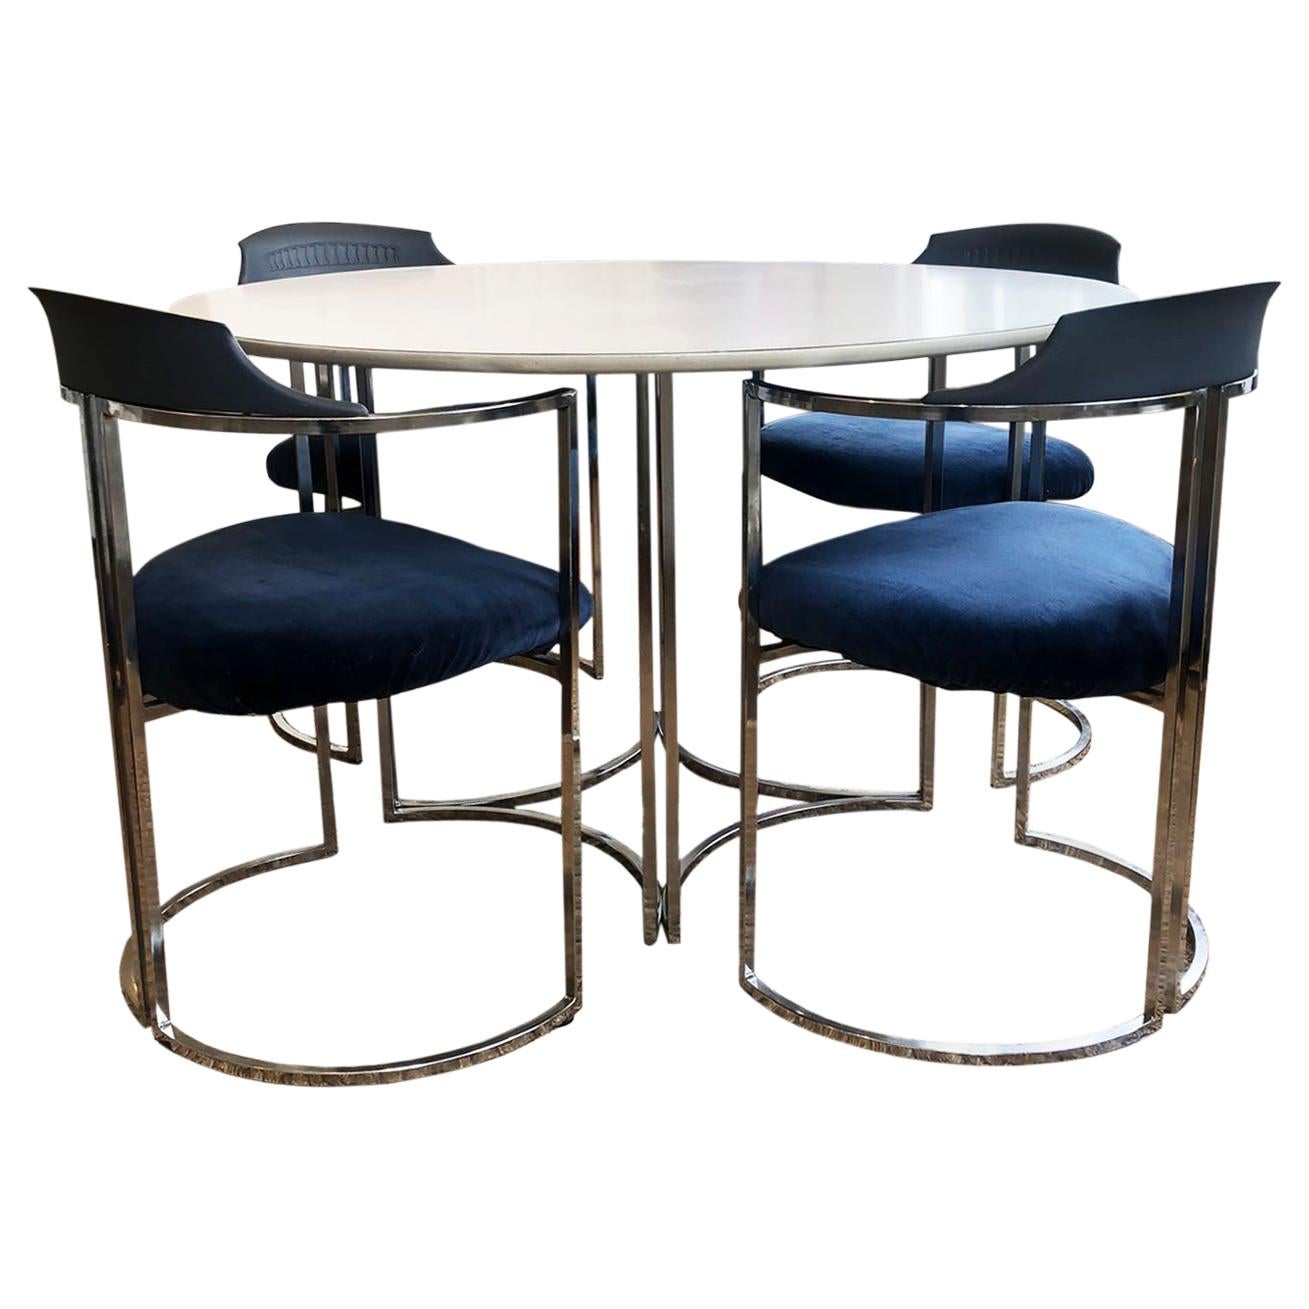 Mid-Century Modern Daystrom Dining Chairs and Table with White Melamine Top